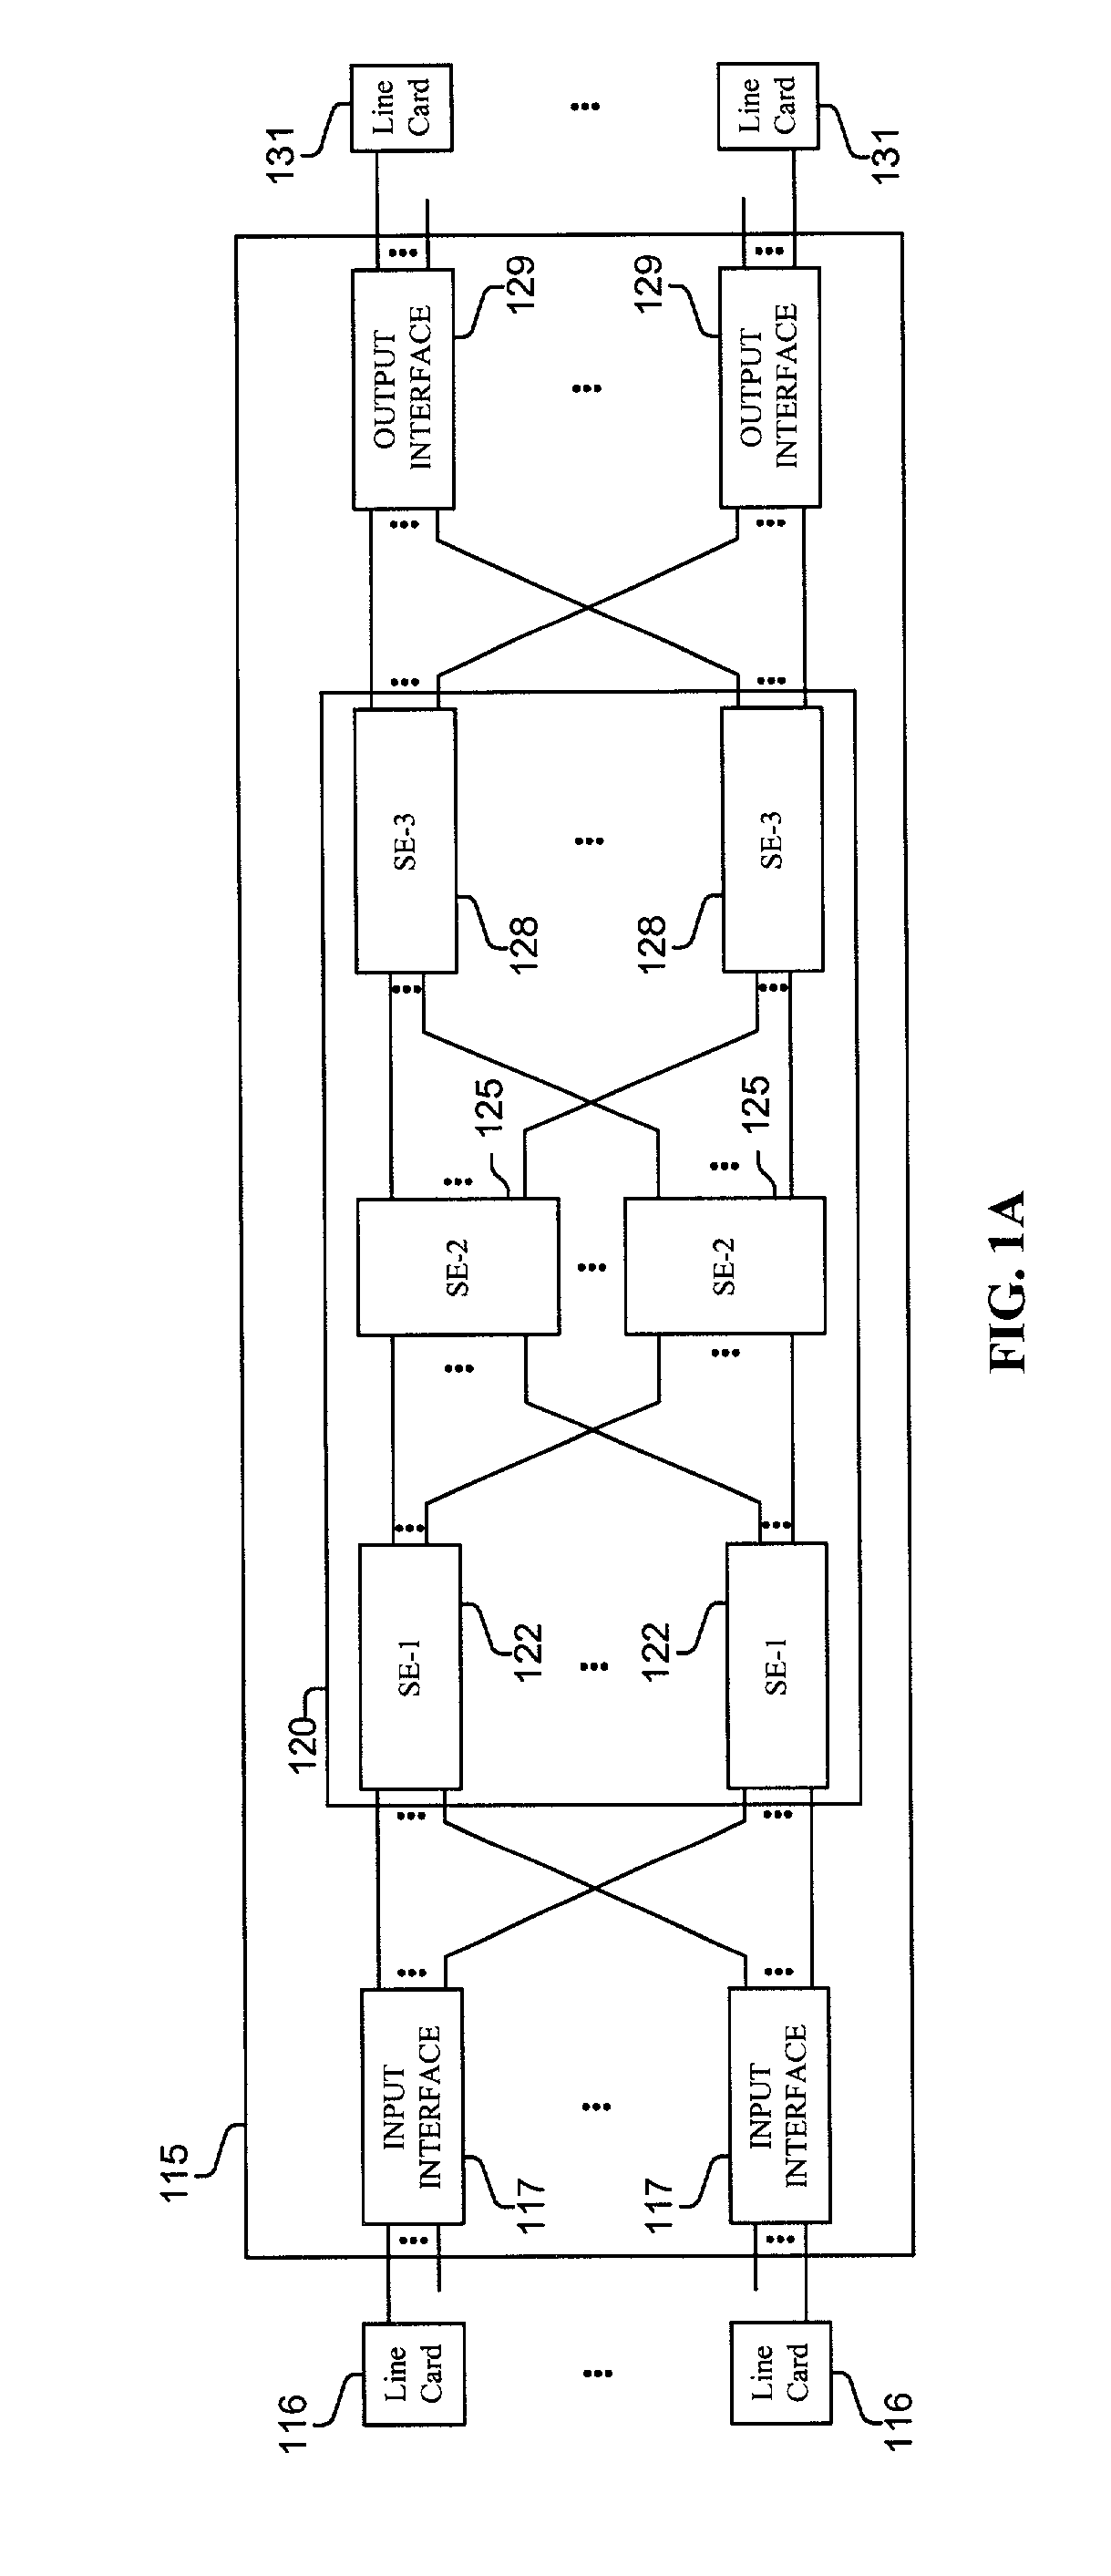 Method and apparatus for using barrier phases to synchronize processes and components in a packet switching system